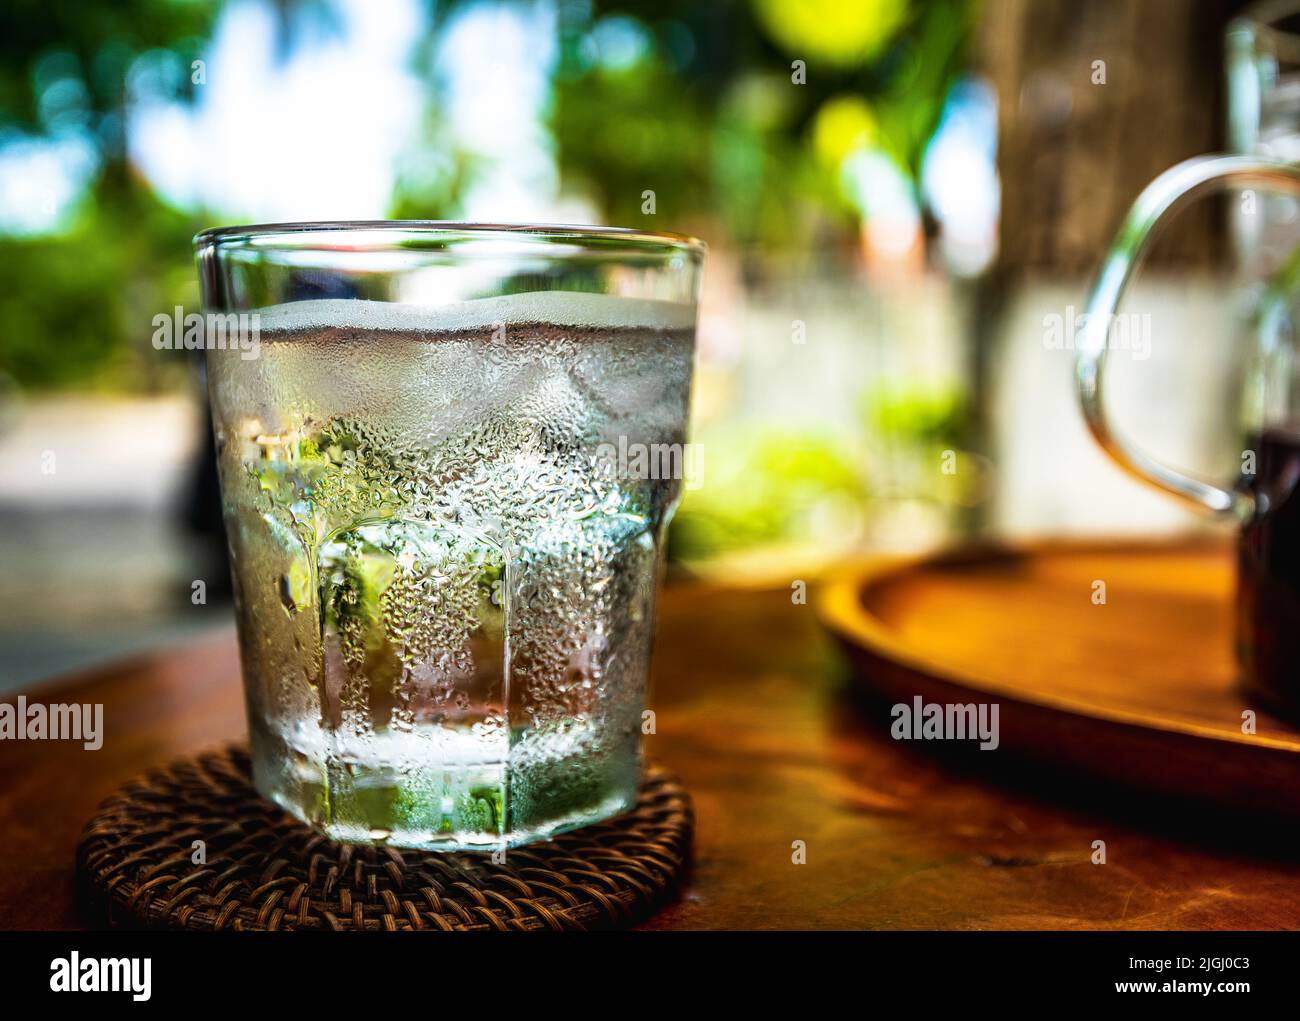 https://c8.alamy.com/comp/2JGJ0C3/ice-cold-water-sitting-in-a-clear-drinking-glass-with-ice-and-condensation-on-the-sides-2JGJ0C3.jpg